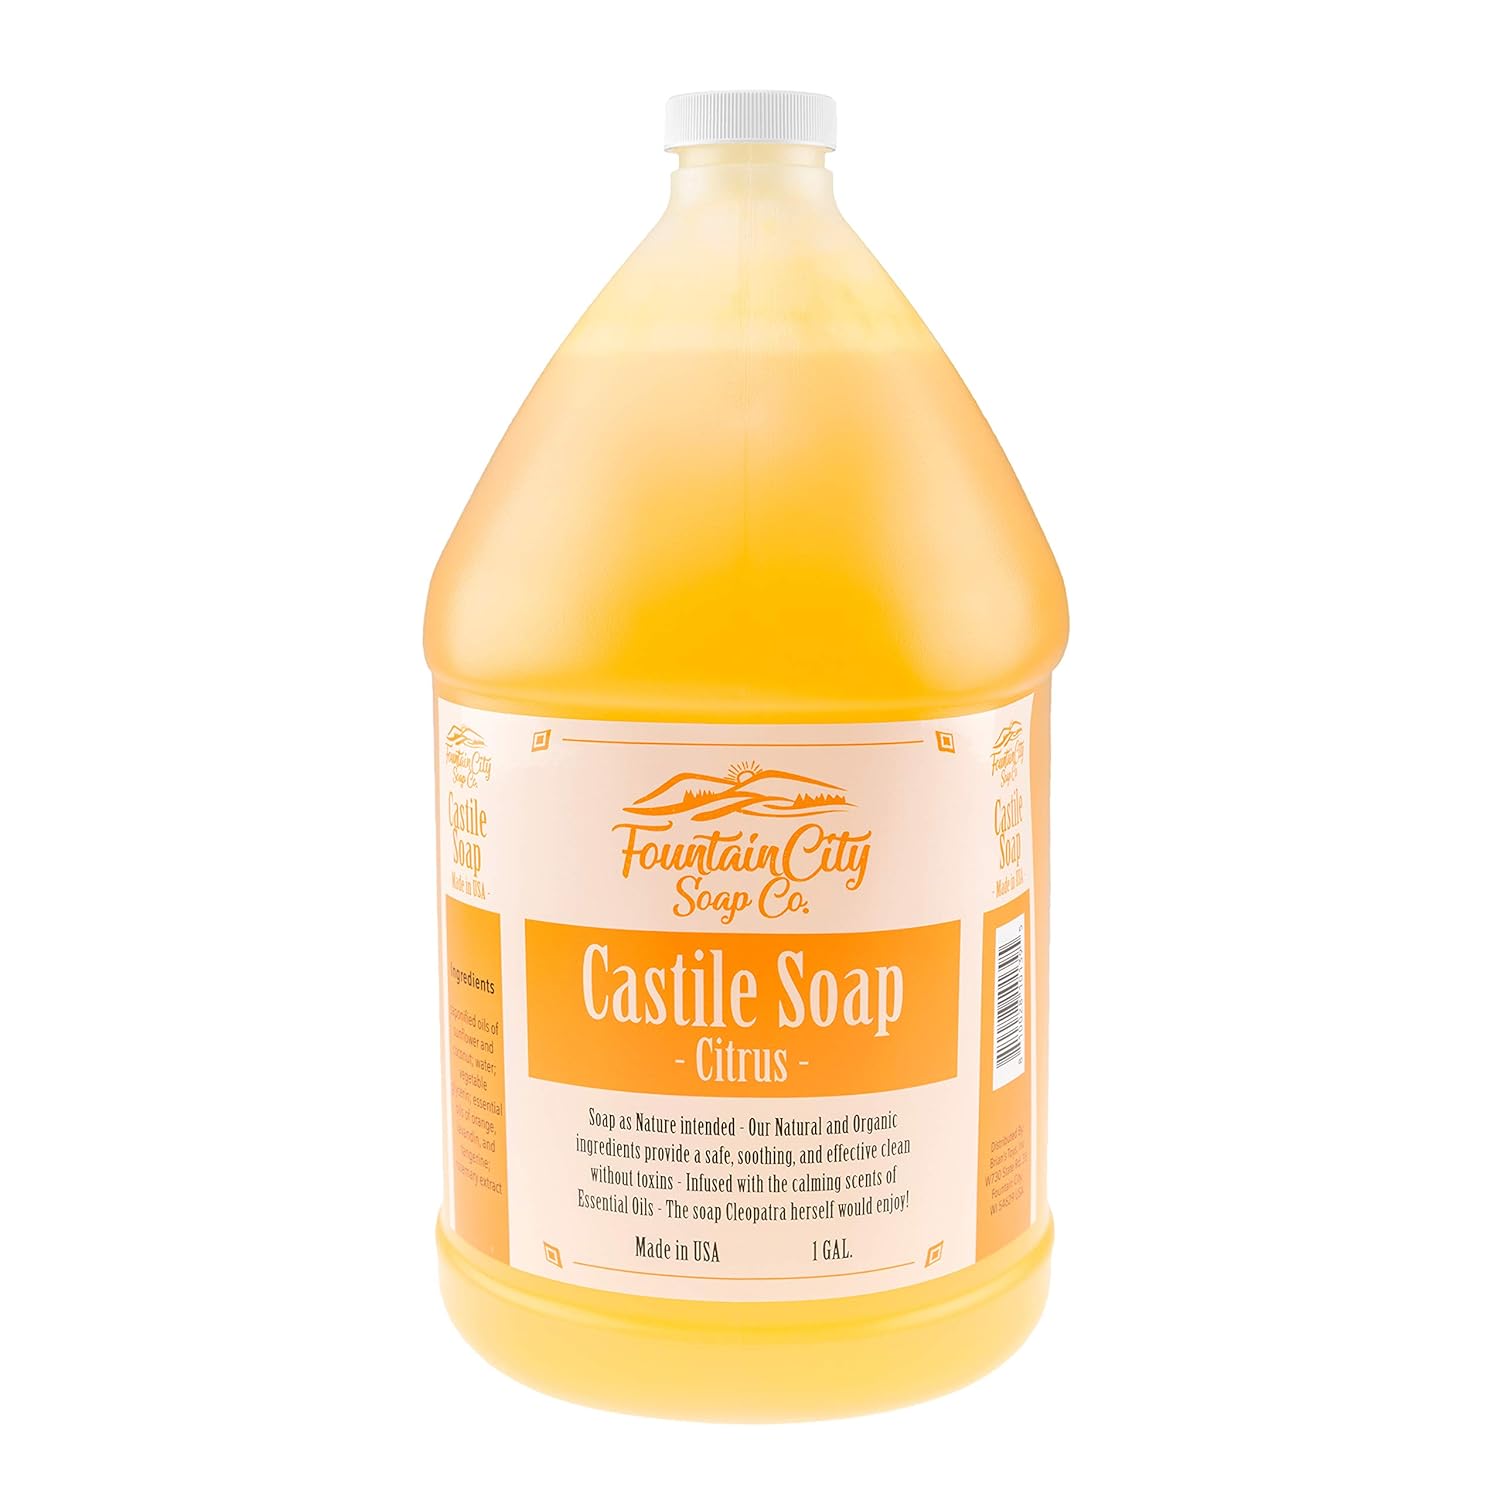 Pure Castile Liquid Soap, Citrus Scented, 1 Gallon - Made with Organic Oils for Face, Body, Hair, Laundry, Pets & Dishes - Concentrated, Vegan, Non-GMO